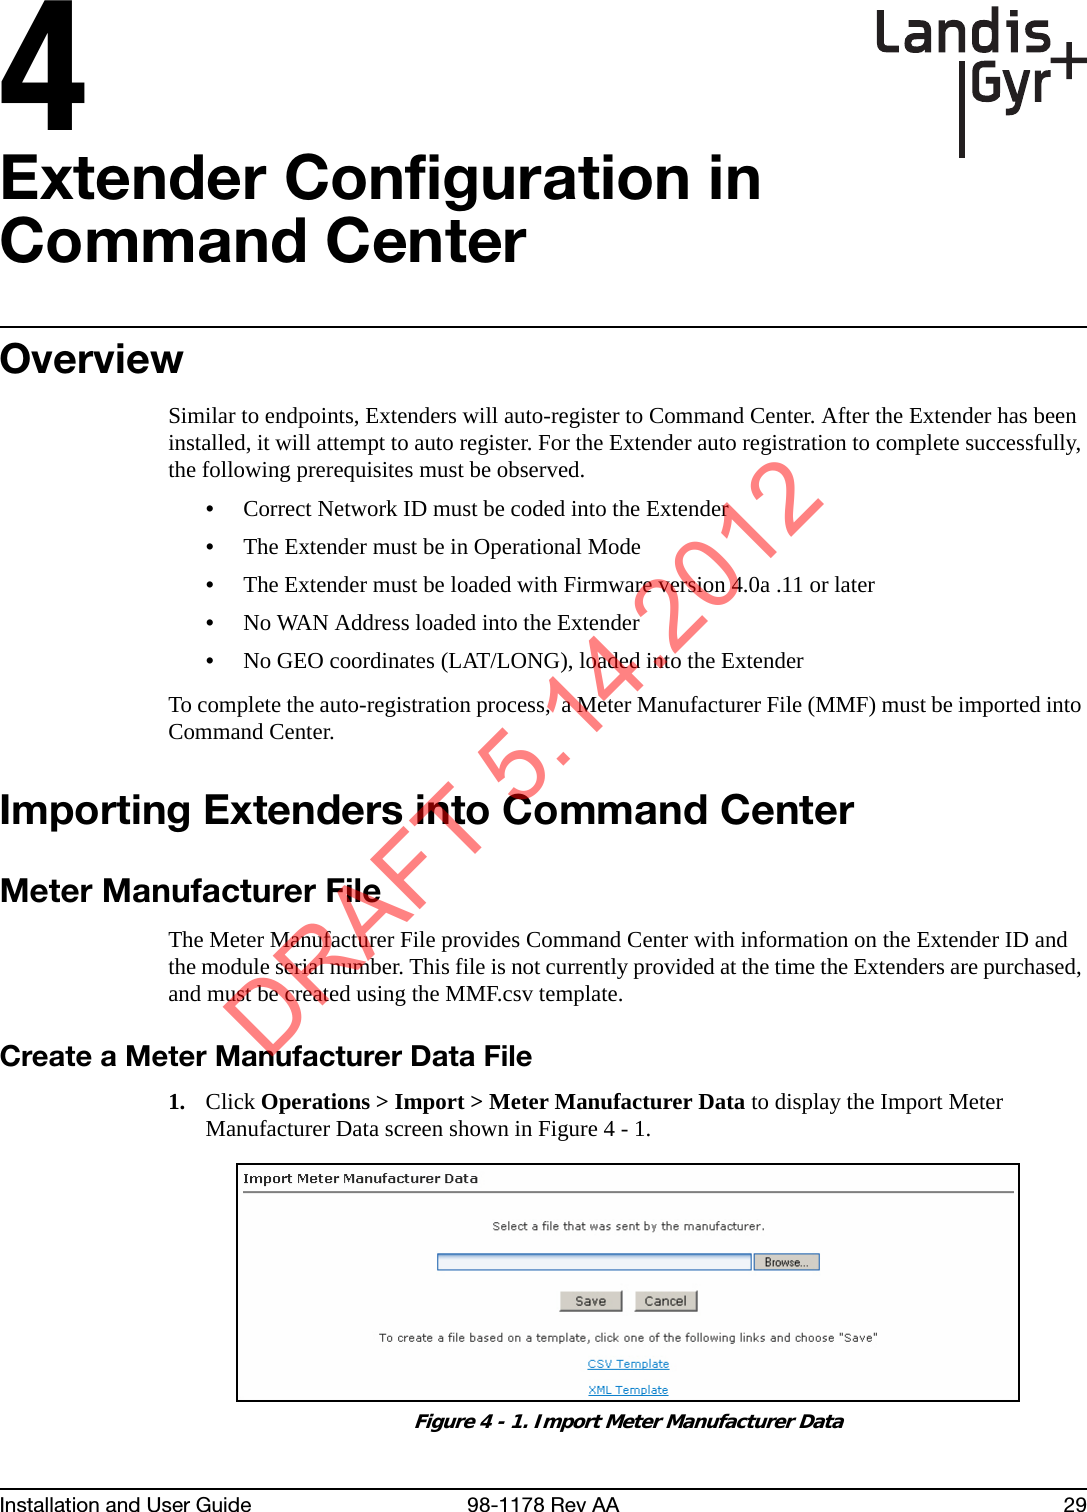 4Installation and User Guide 98-1178 Rev AA 29Extender Configuration in Command CenterOverviewSimilar to endpoints, Extenders will auto-register to Command Center. After the Extender has been installed, it will attempt to auto register. For the Extender auto registration to complete successfully, the following prerequisites must be observed.•Correct Network ID must be coded into the Extender•The Extender must be in Operational Mode•The Extender must be loaded with Firmware version 4.0a .11 or later•No WAN Address loaded into the Extender•No GEO coordinates (LAT/LONG), loaded into the ExtenderTo complete the auto-registration process,  a Meter Manufacturer File (MMF) must be imported into Command Center.Importing Extenders into Command CenterMeter Manufacturer FileThe Meter Manufacturer File provides Command Center with information on the Extender ID and the module serial number. This file is not currently provided at the time the Extenders are purchased, and must be created using the MMF.csv template. Create a Meter Manufacturer Data File1. Click Operations &gt; Import &gt; Meter Manufacturer Data to display the Import Meter Manufacturer Data screen shown in Figure 4 - 1.Figure 4 - 1. Import Meter Manufacturer DataDRAFT 5.14.2012